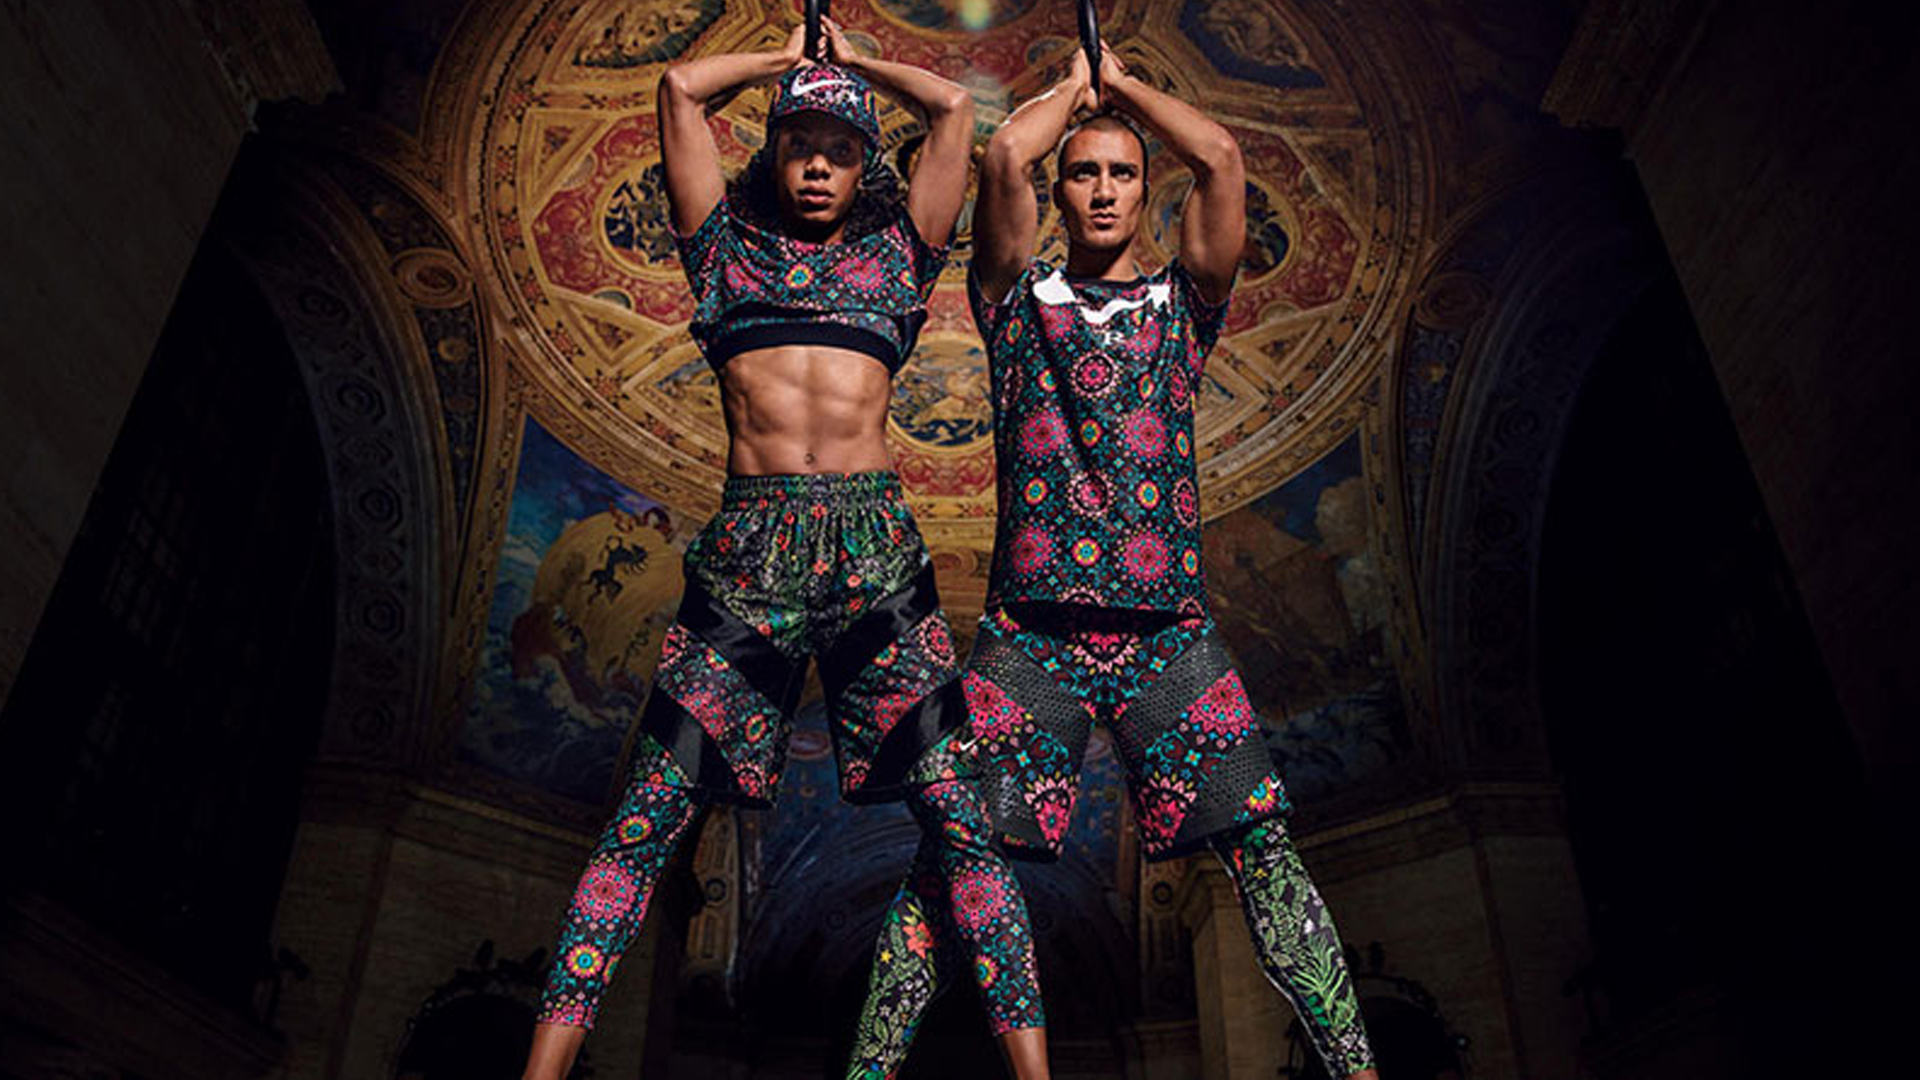 NIKELAB AND RICCARDO TISCI TEAMS UP FOR AN ACTIVEWEAR COLLECTION